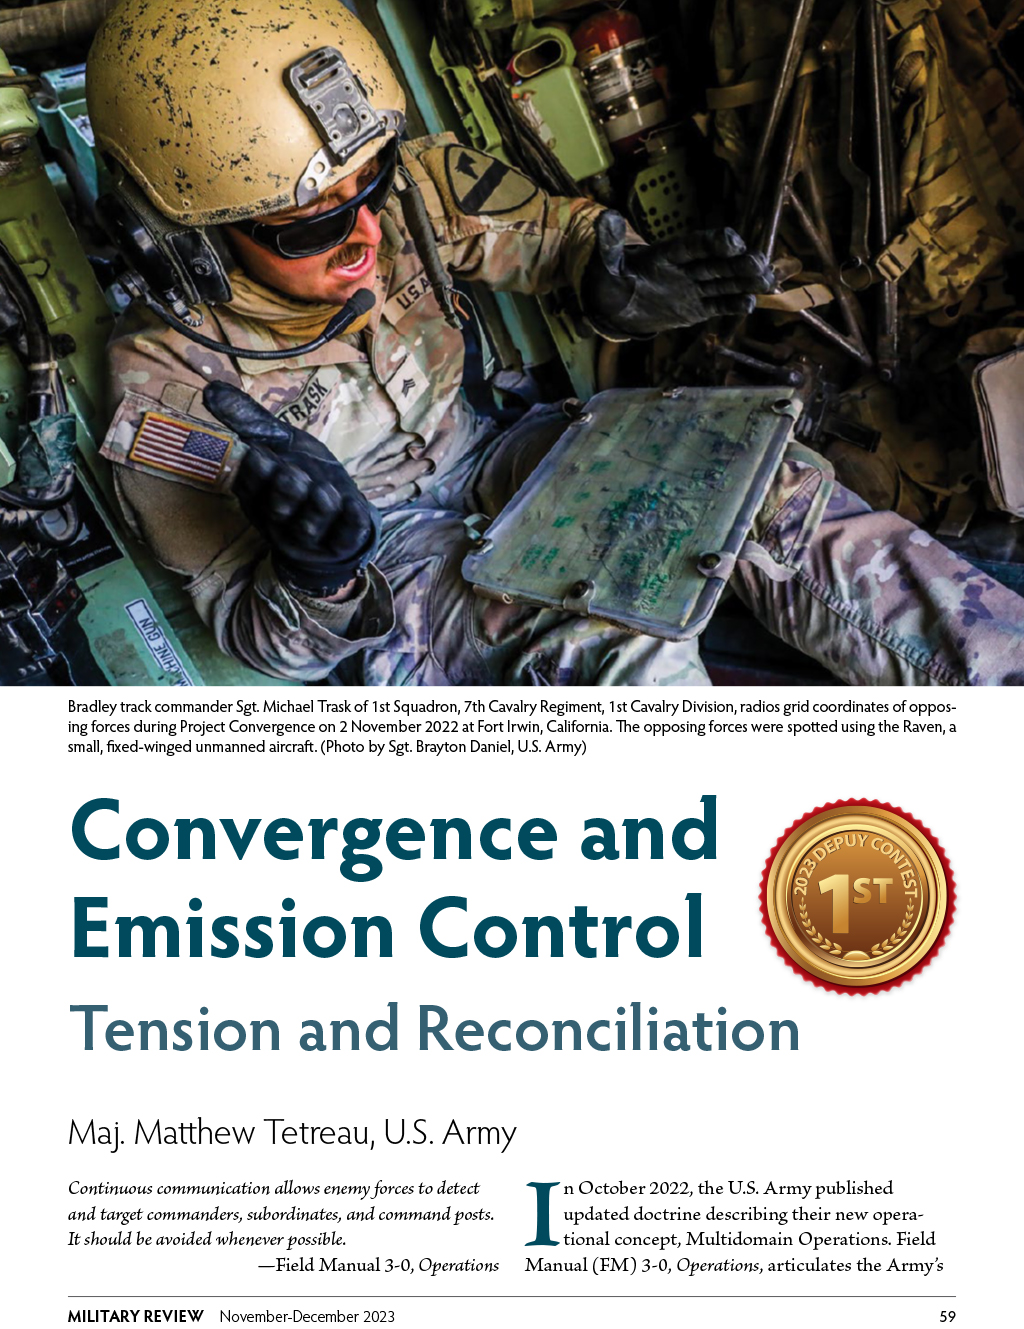 Convergence and Emission Control: Tension and Reconciliation